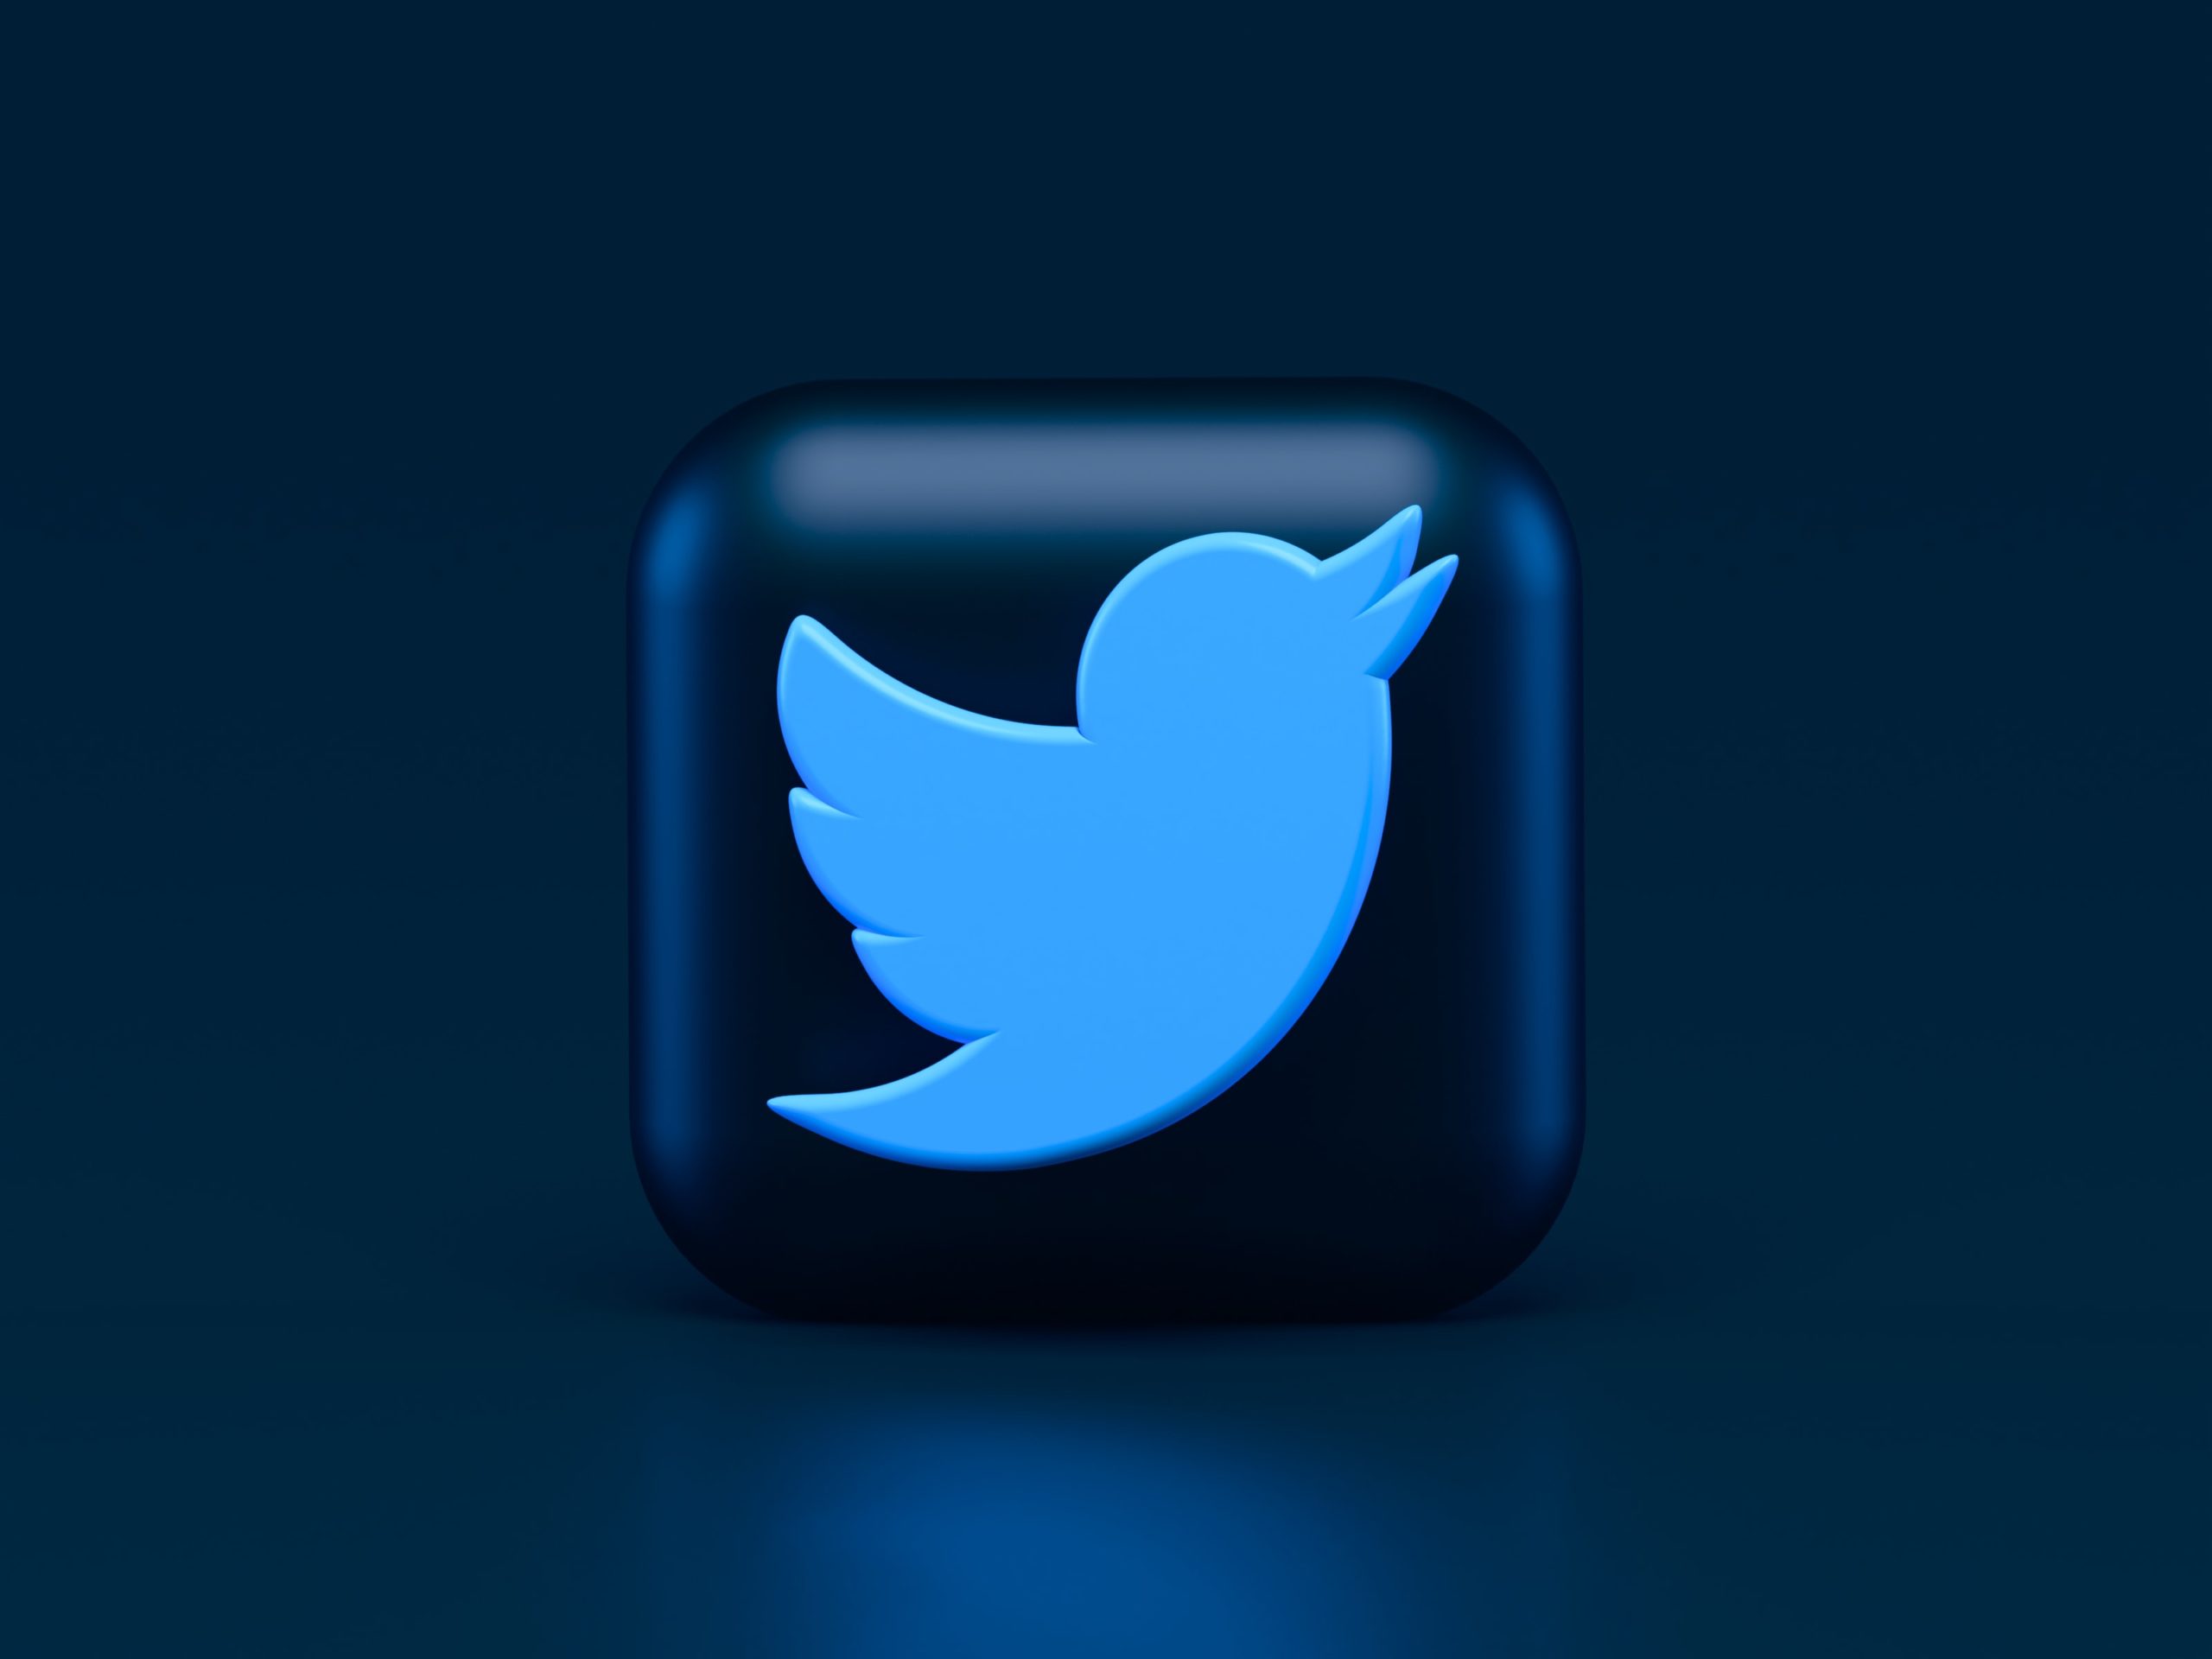 Twitter Adds More Location-Based Marketing Features